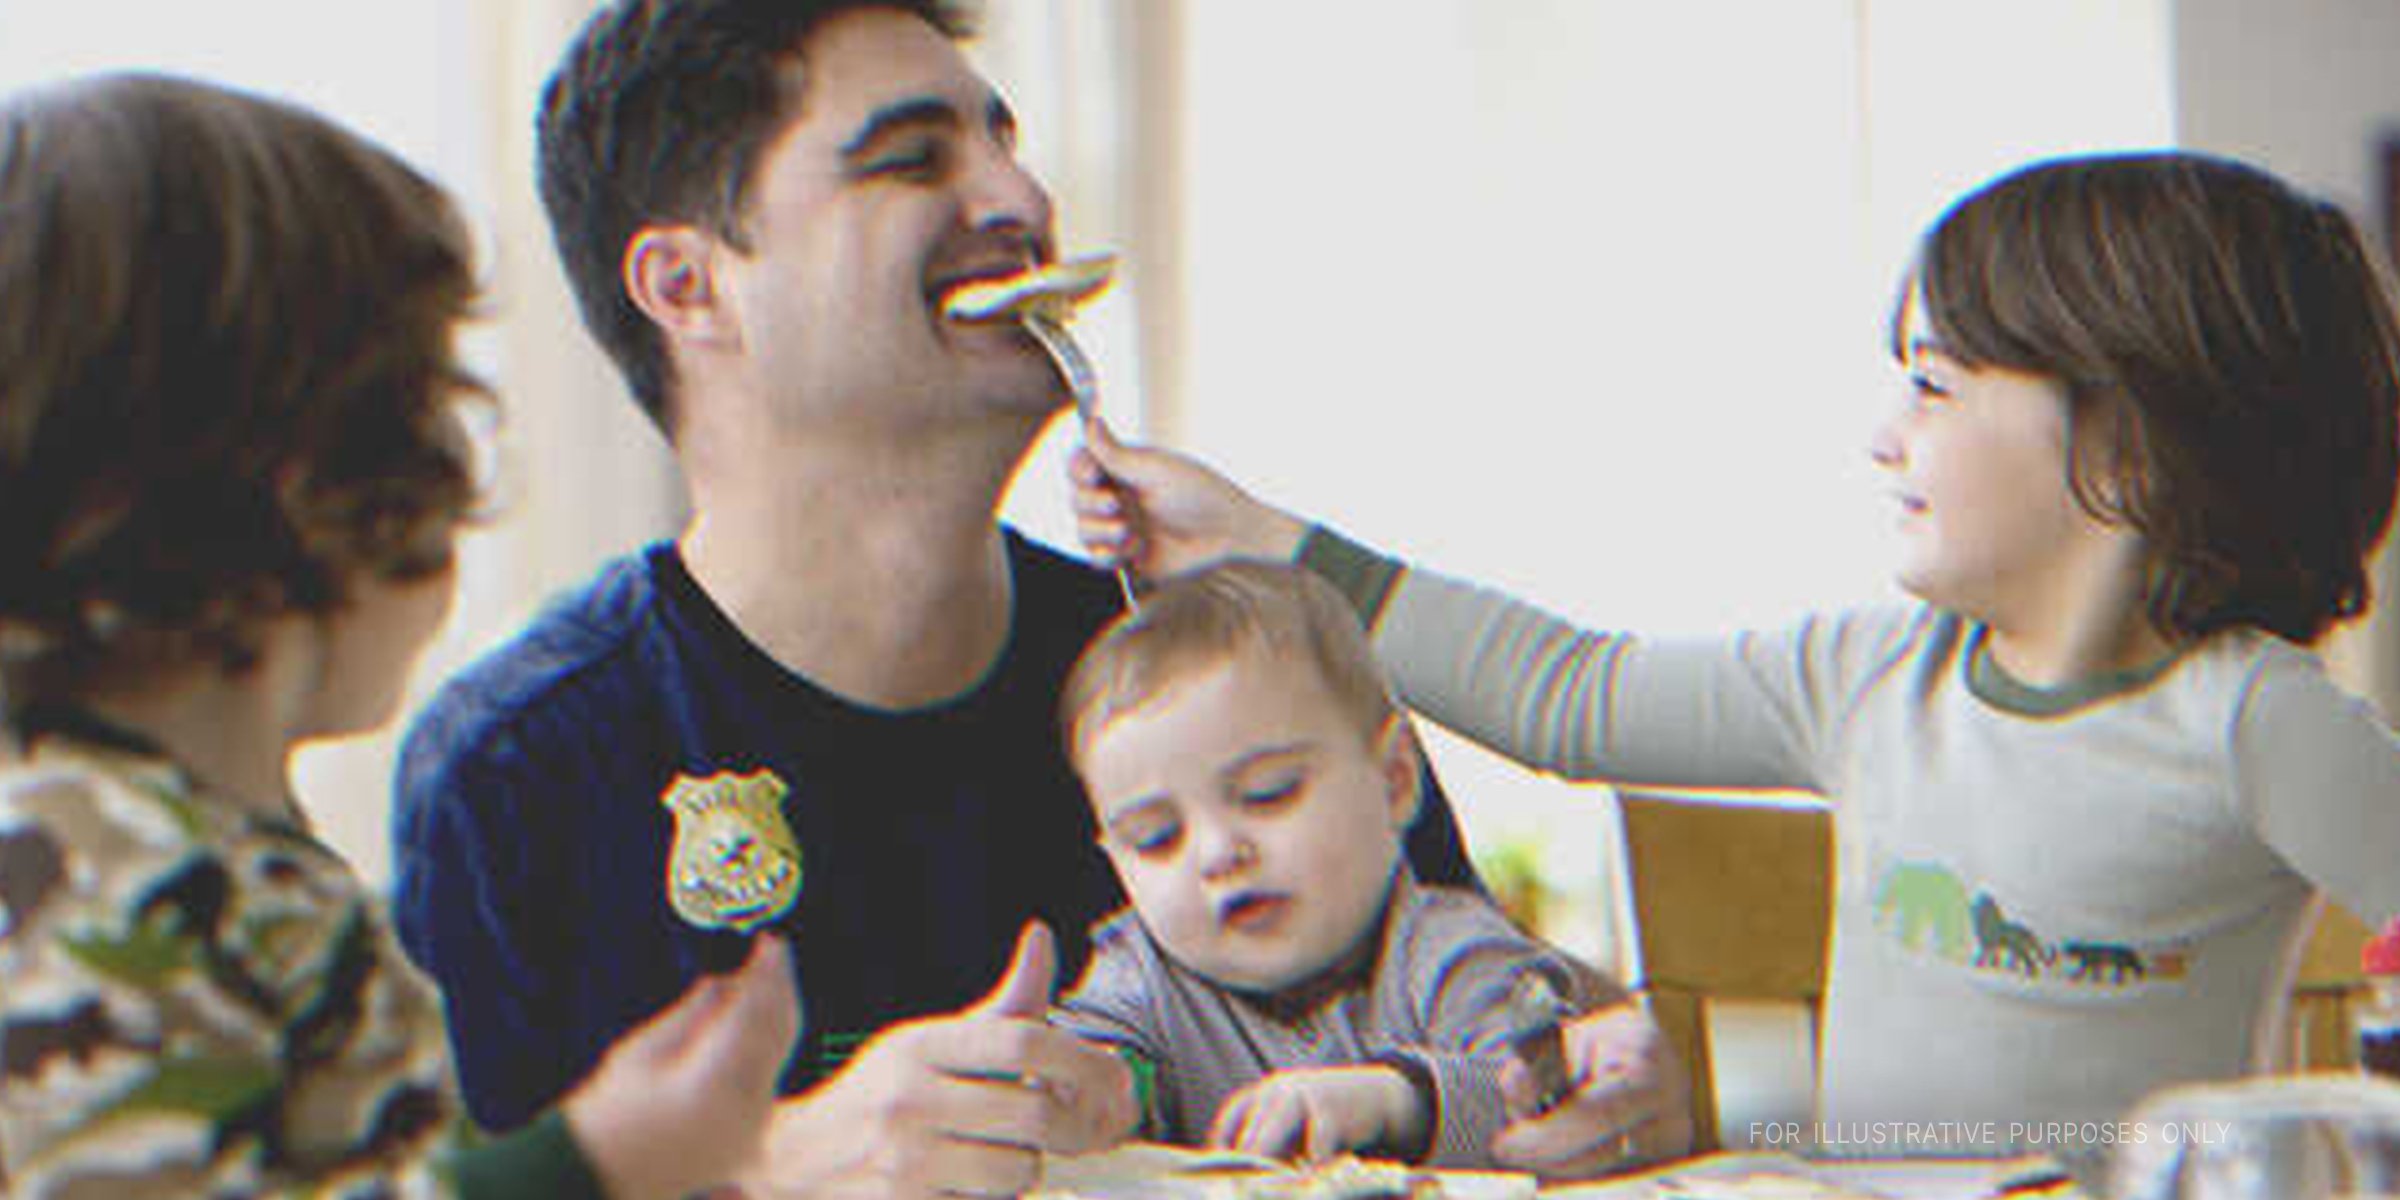 Man eating with three kids. | Source: Shutterstock | Getty Images